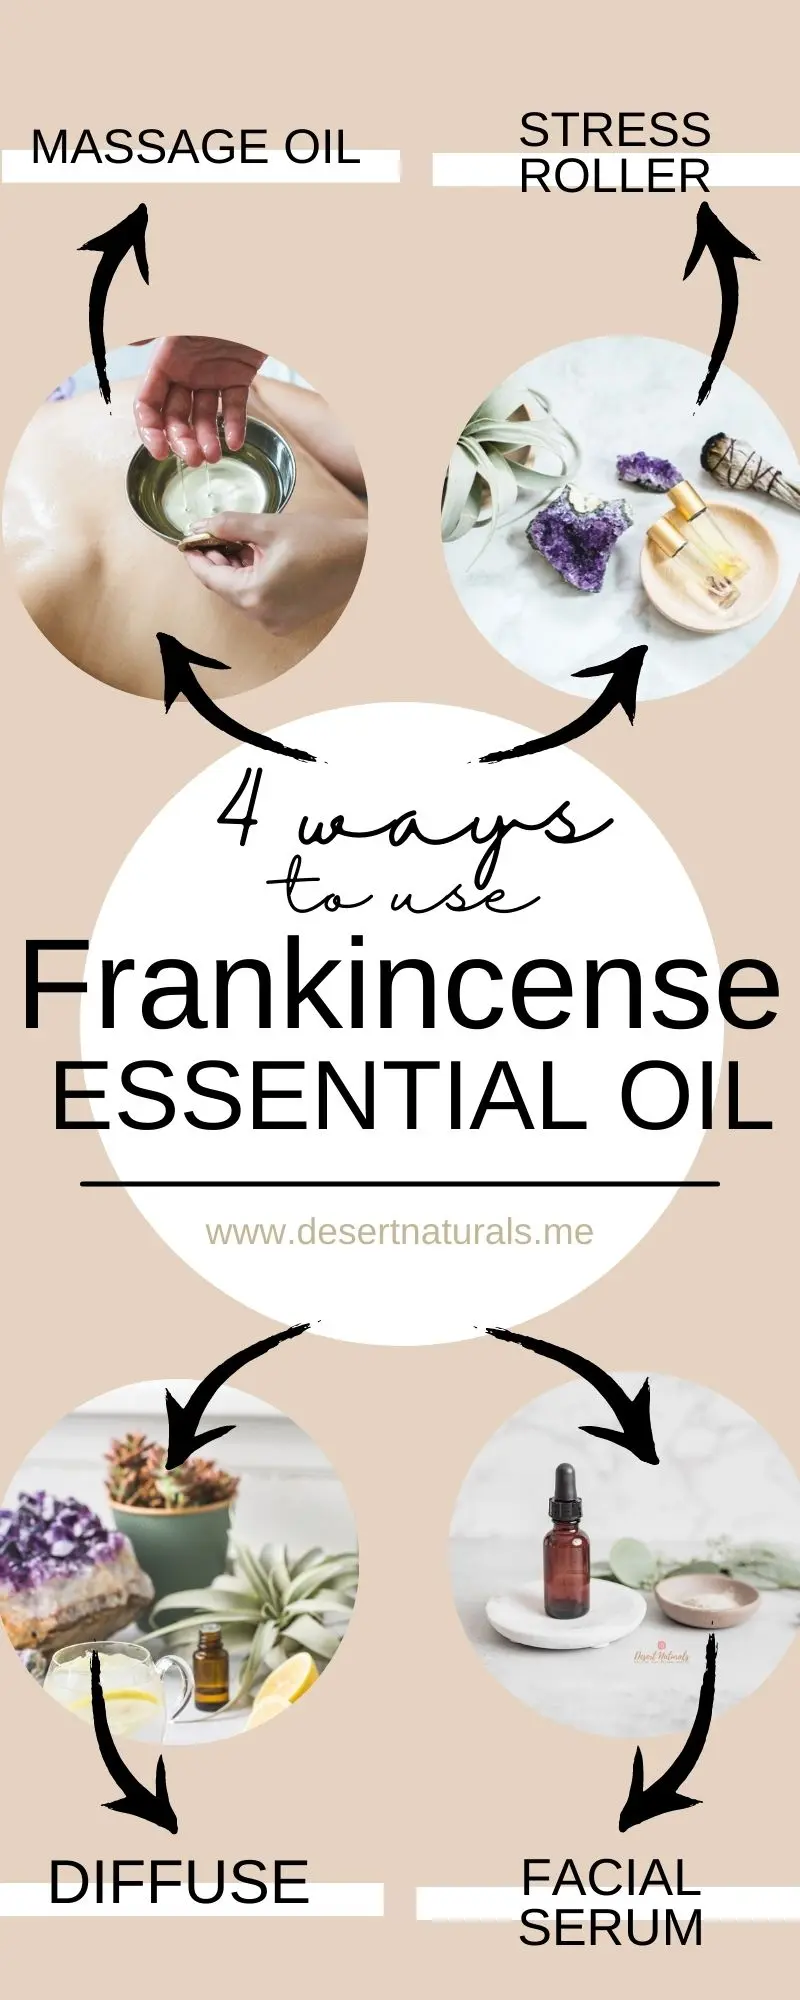 4 ways to use frankincense essential oil in a diffuser, face serum, stress roller and massage oil